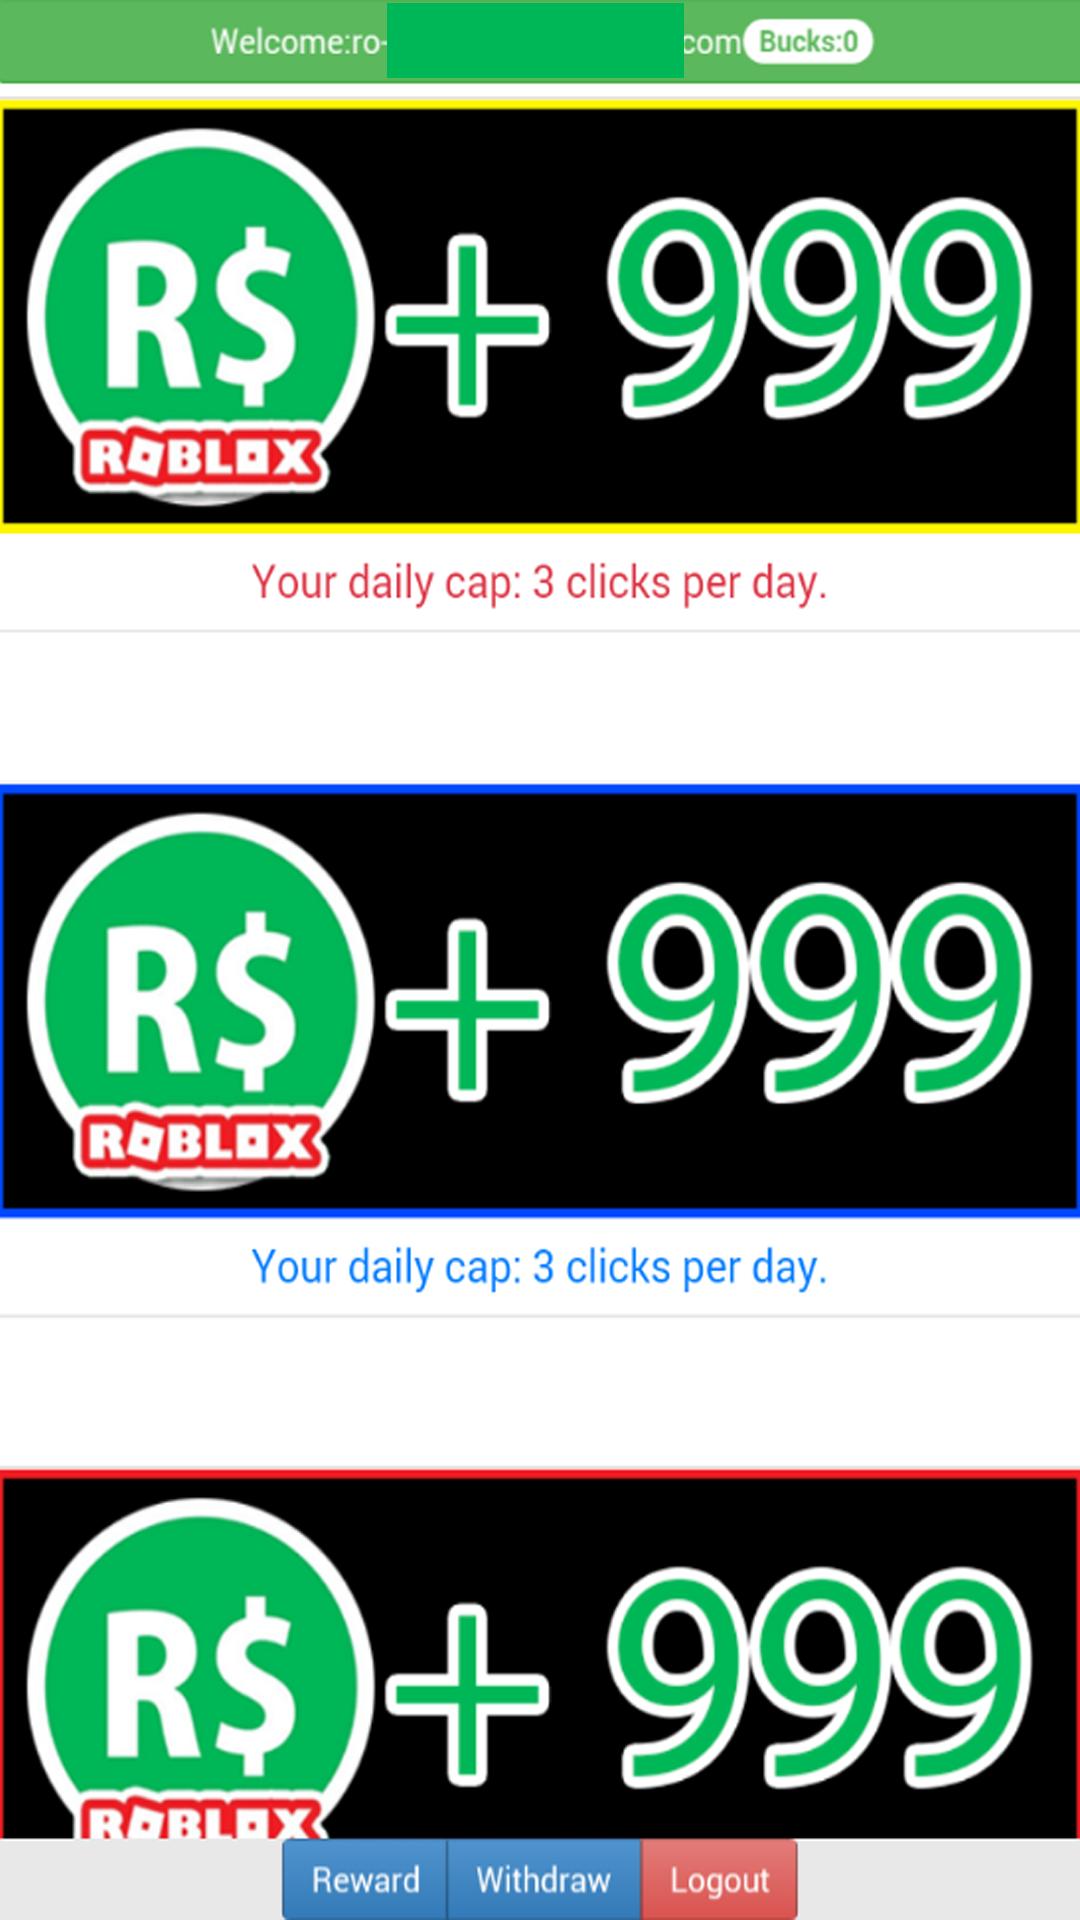 999 Robuxs Free Tips For Android Apk Download